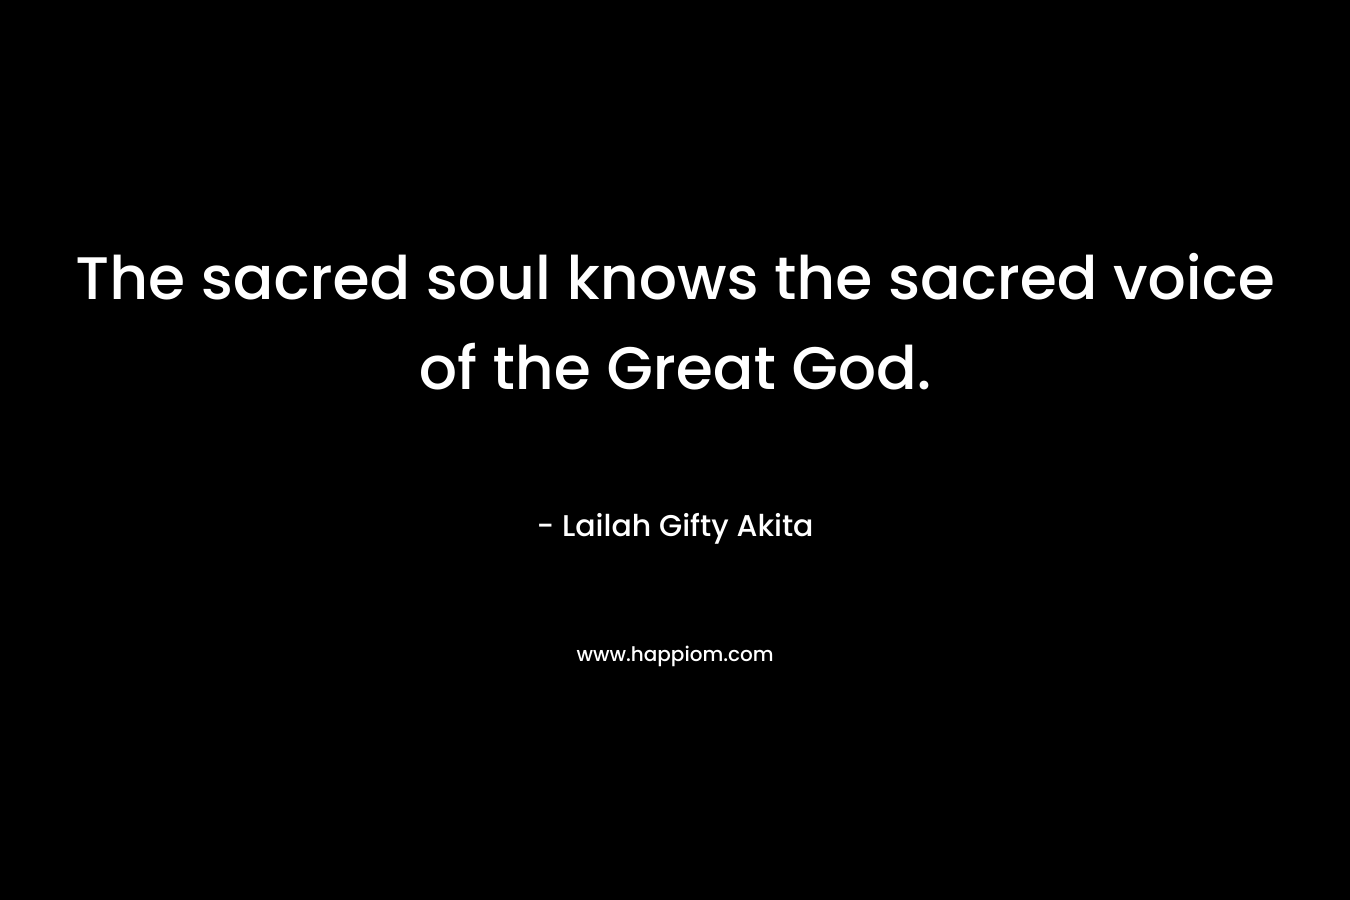 The sacred soul knows the sacred voice of the Great God.